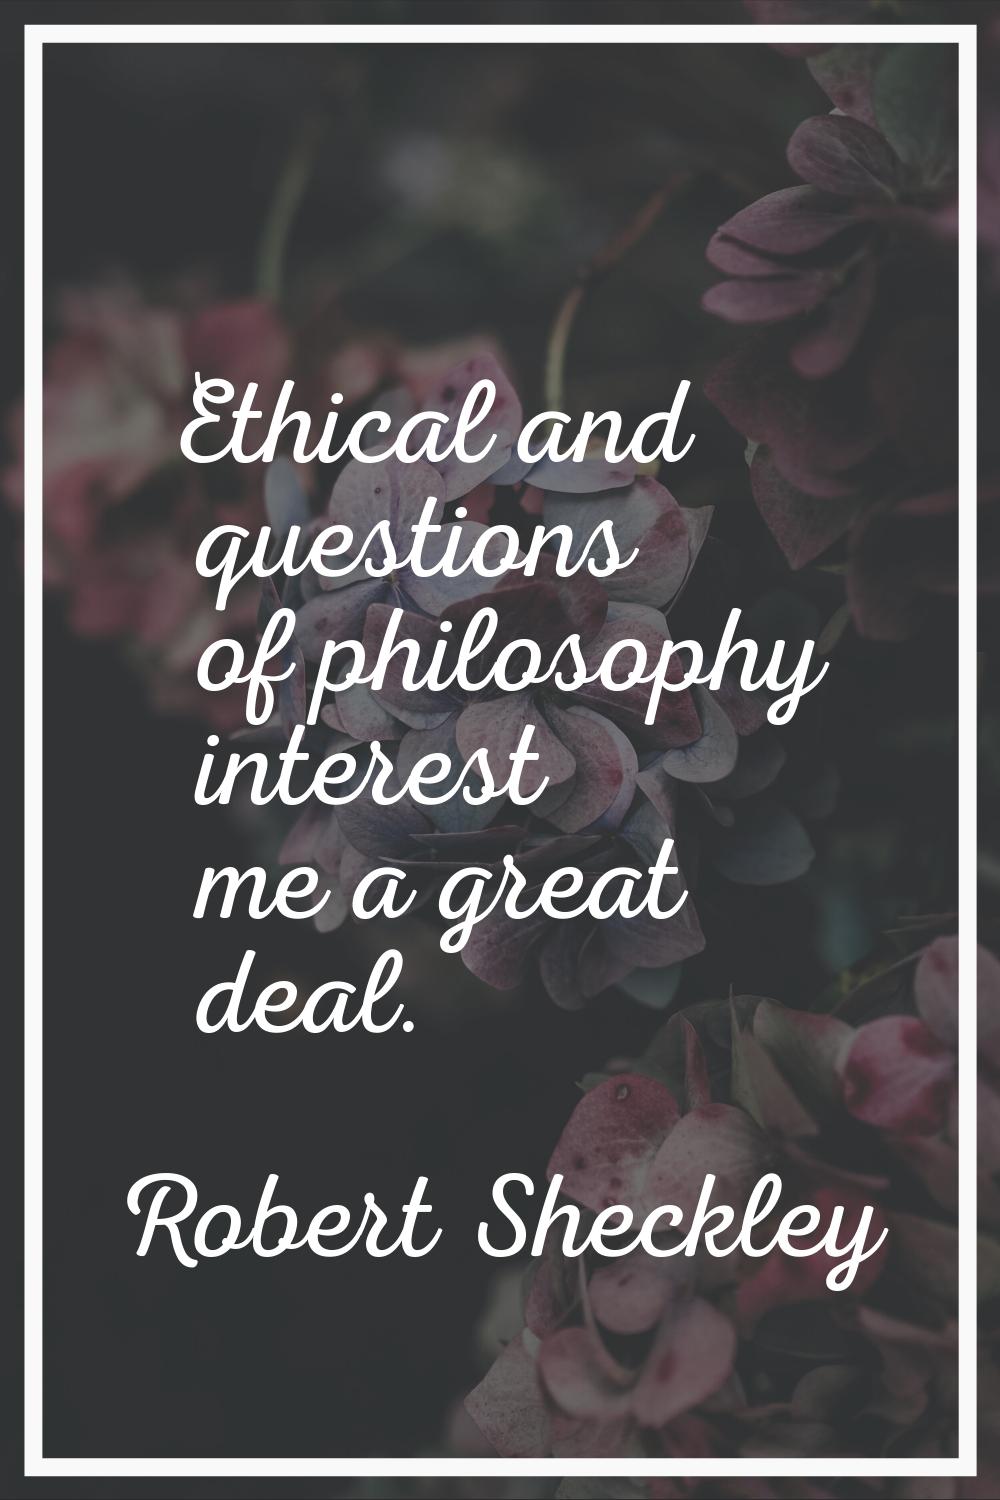 Ethical and questions of philosophy interest me a great deal.